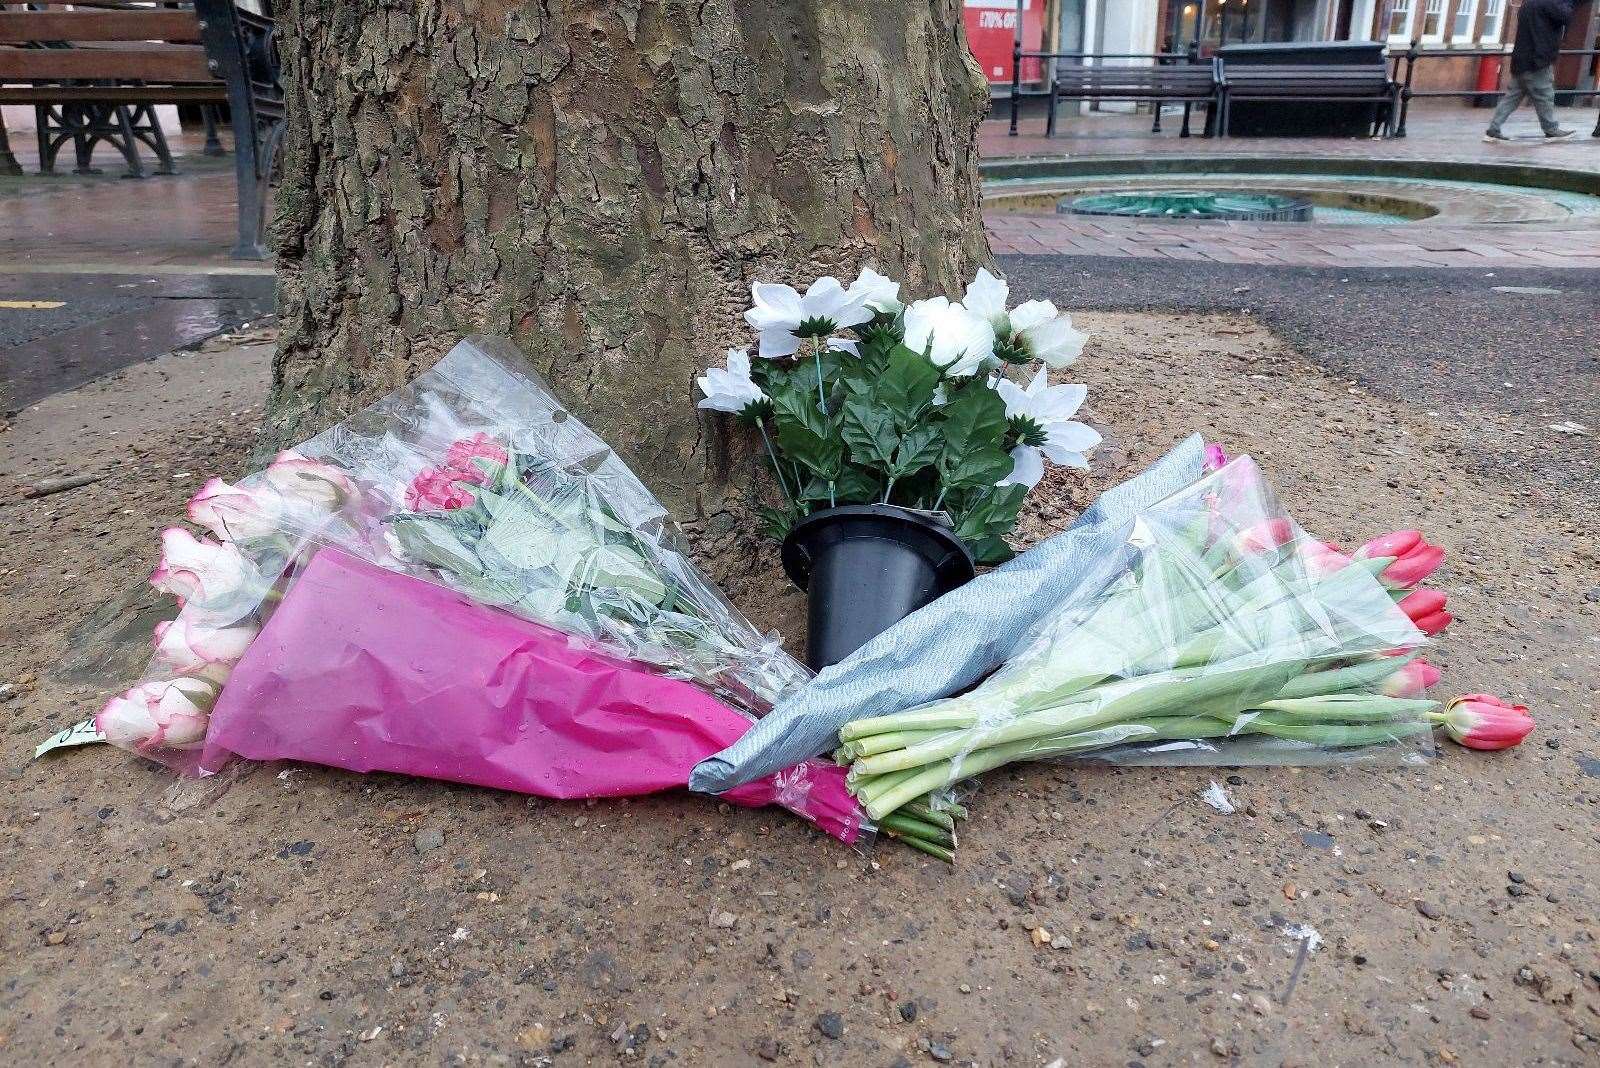 Flowers were left near a tree at the scene of the woman's death